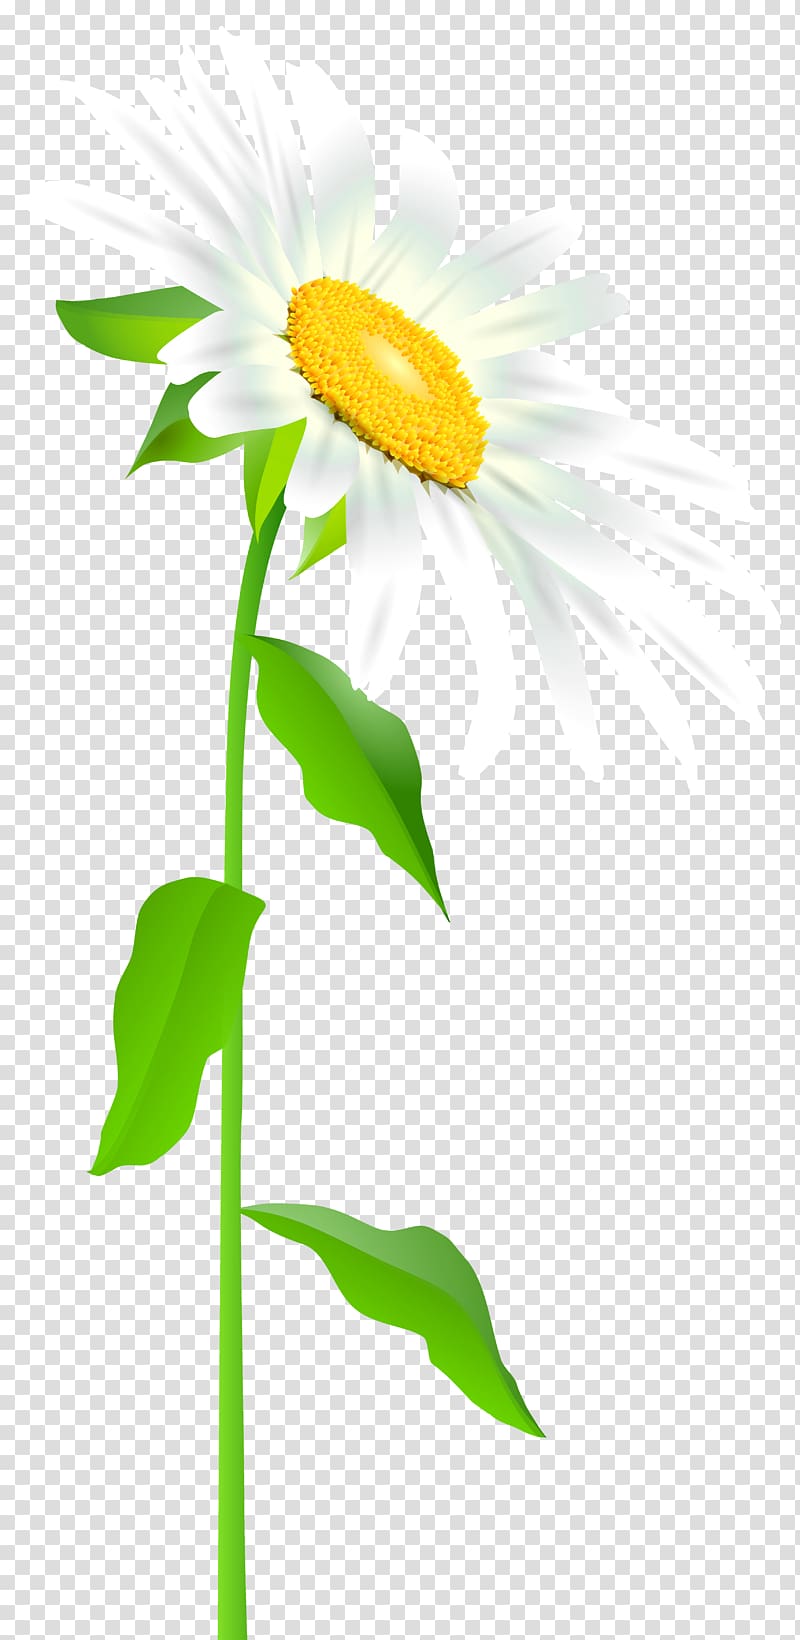 white daisy illustration, Common sunflower Text Leaf Illustration, Daisy with Stem transparent background PNG clipart